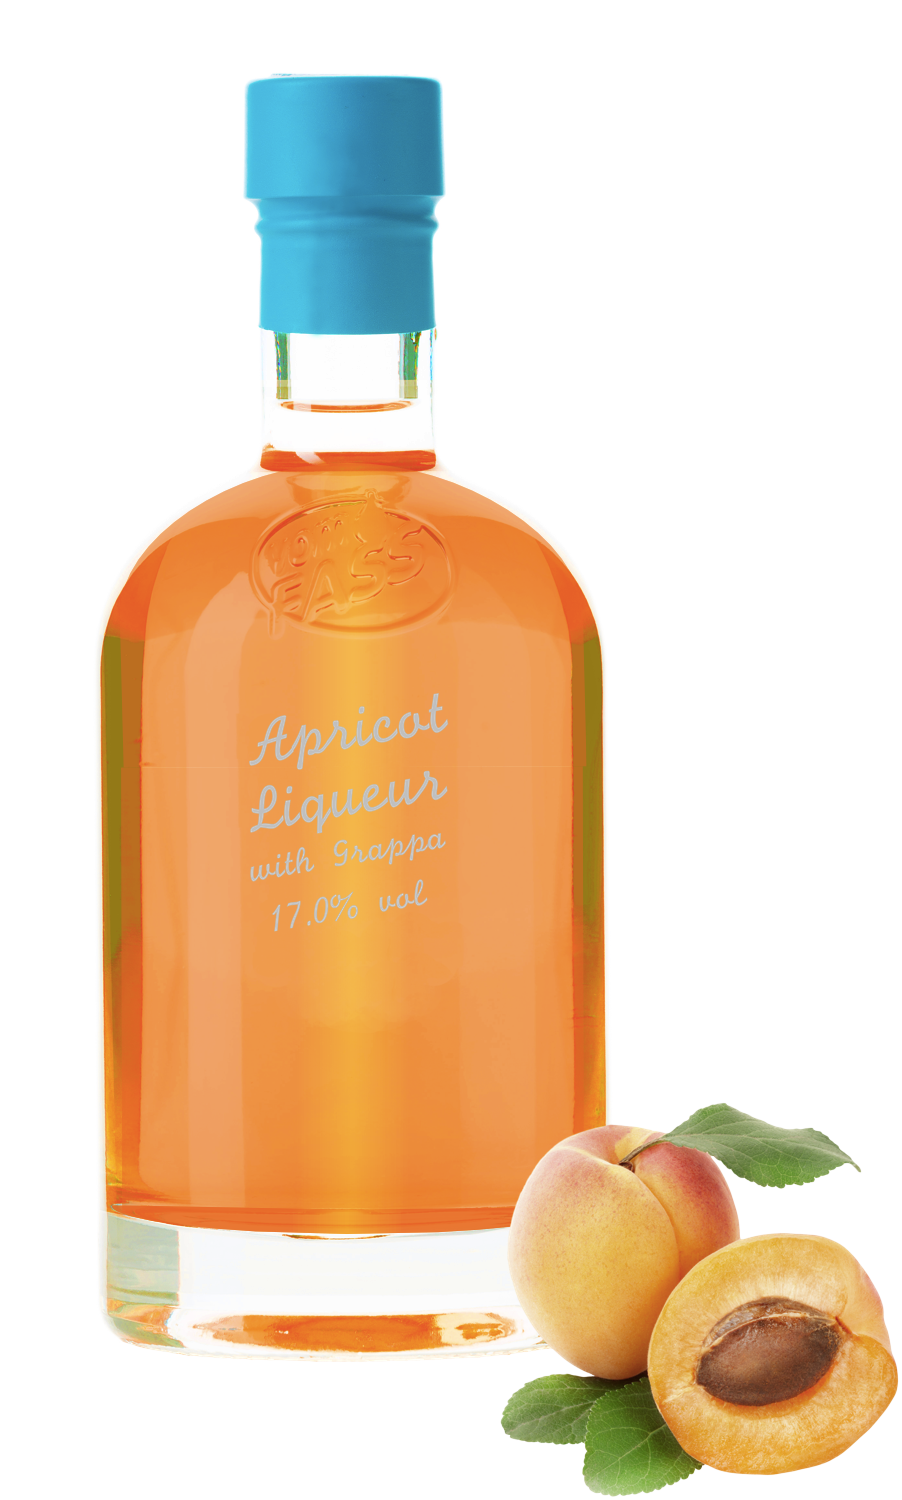 Apricot liqueur with grappa